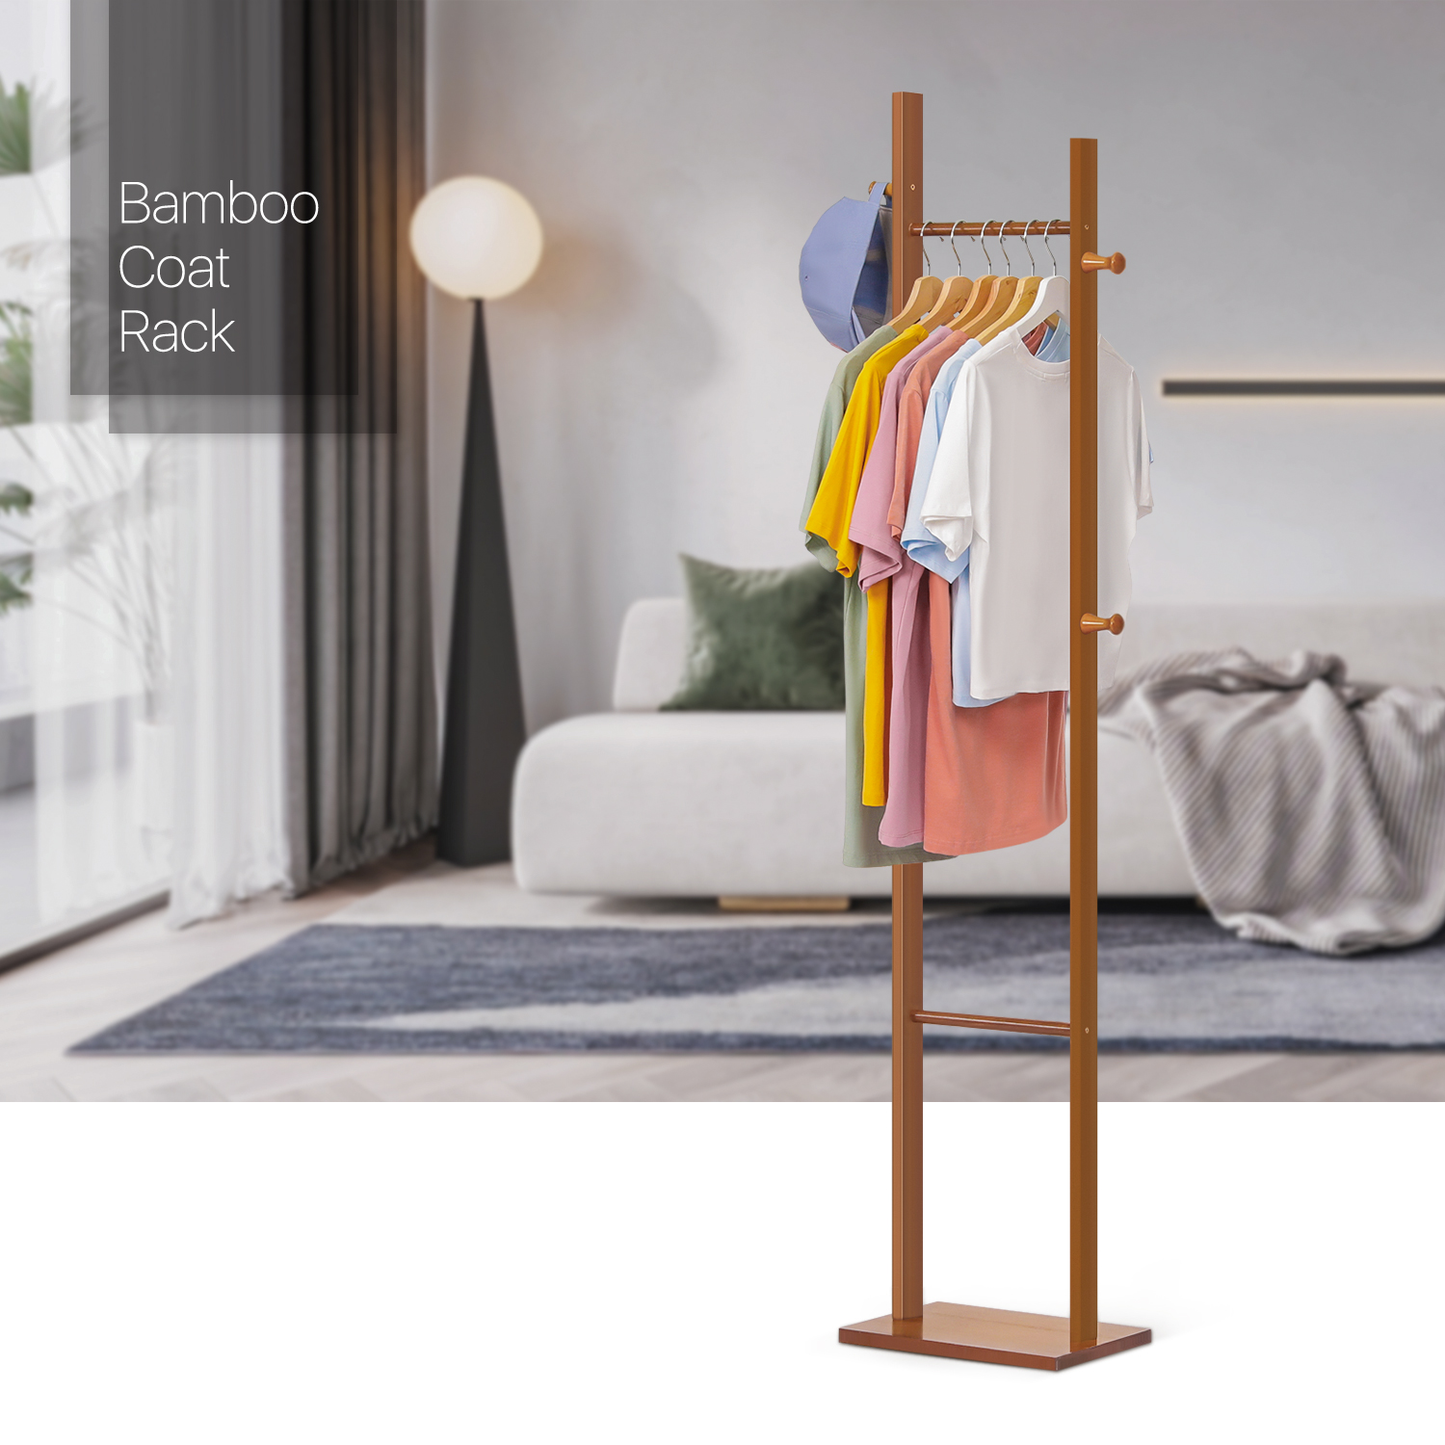 Coat Tree Stand - H Frame